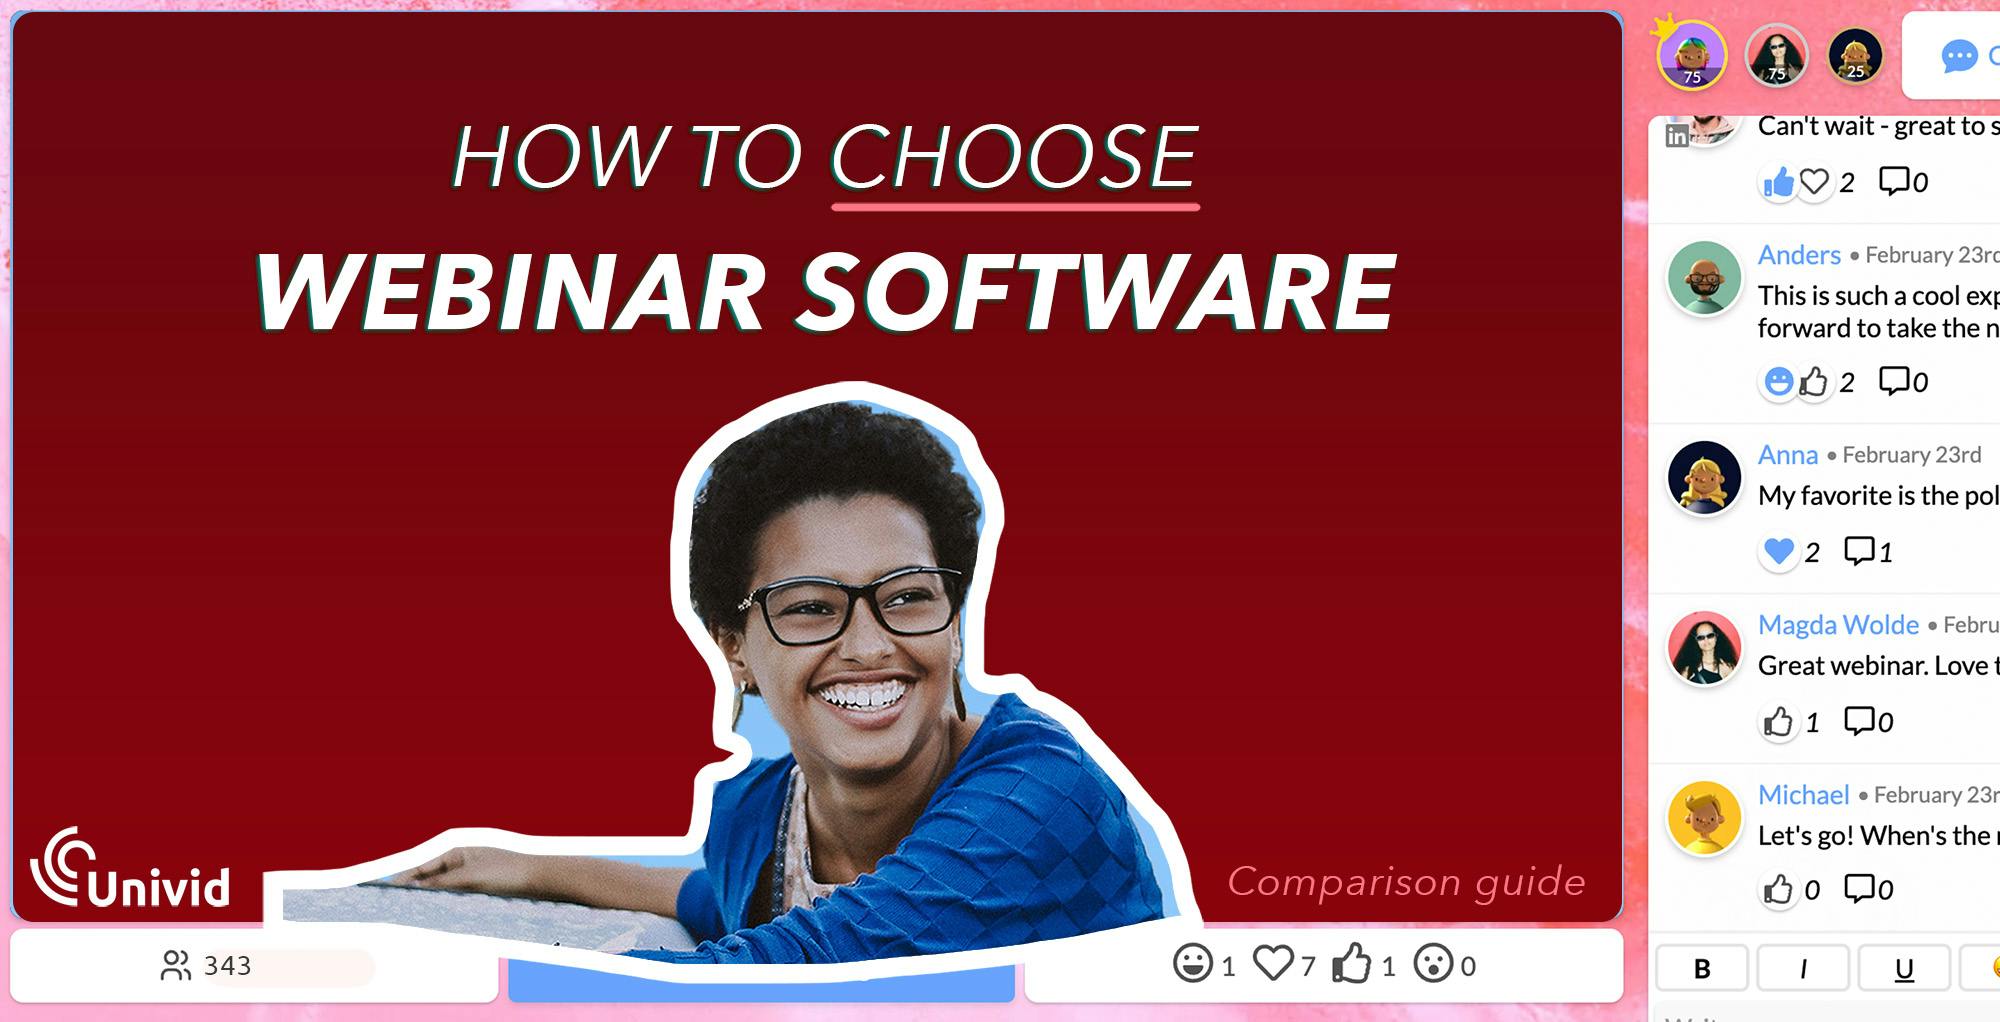 Trying to find the best platform for webinars, but feeling overwhelmed by all the options? This webinar buyer’s guide gives you an overview to compare and choose the right one amongst webinar platforms.